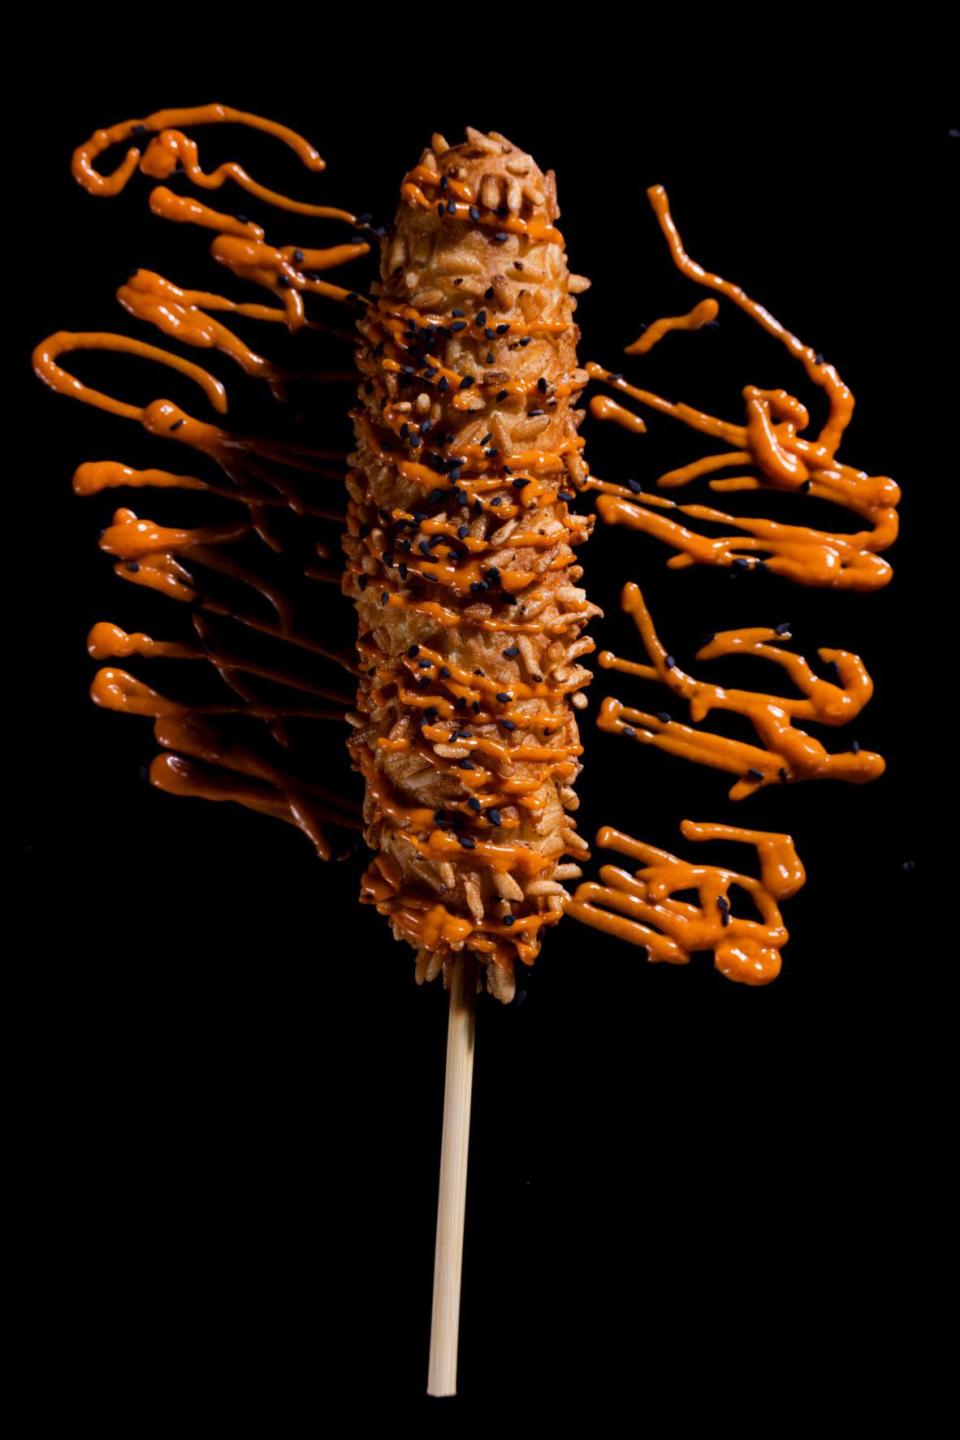 •	Maggot Covered Cheese Dog (inspired by “Bugs: Eaten Alive” original haunted house): A Korean-style hot dog with fresh mozzarella, rolled in puffed rice, topped with gochujang drizzle and black sesame seeds